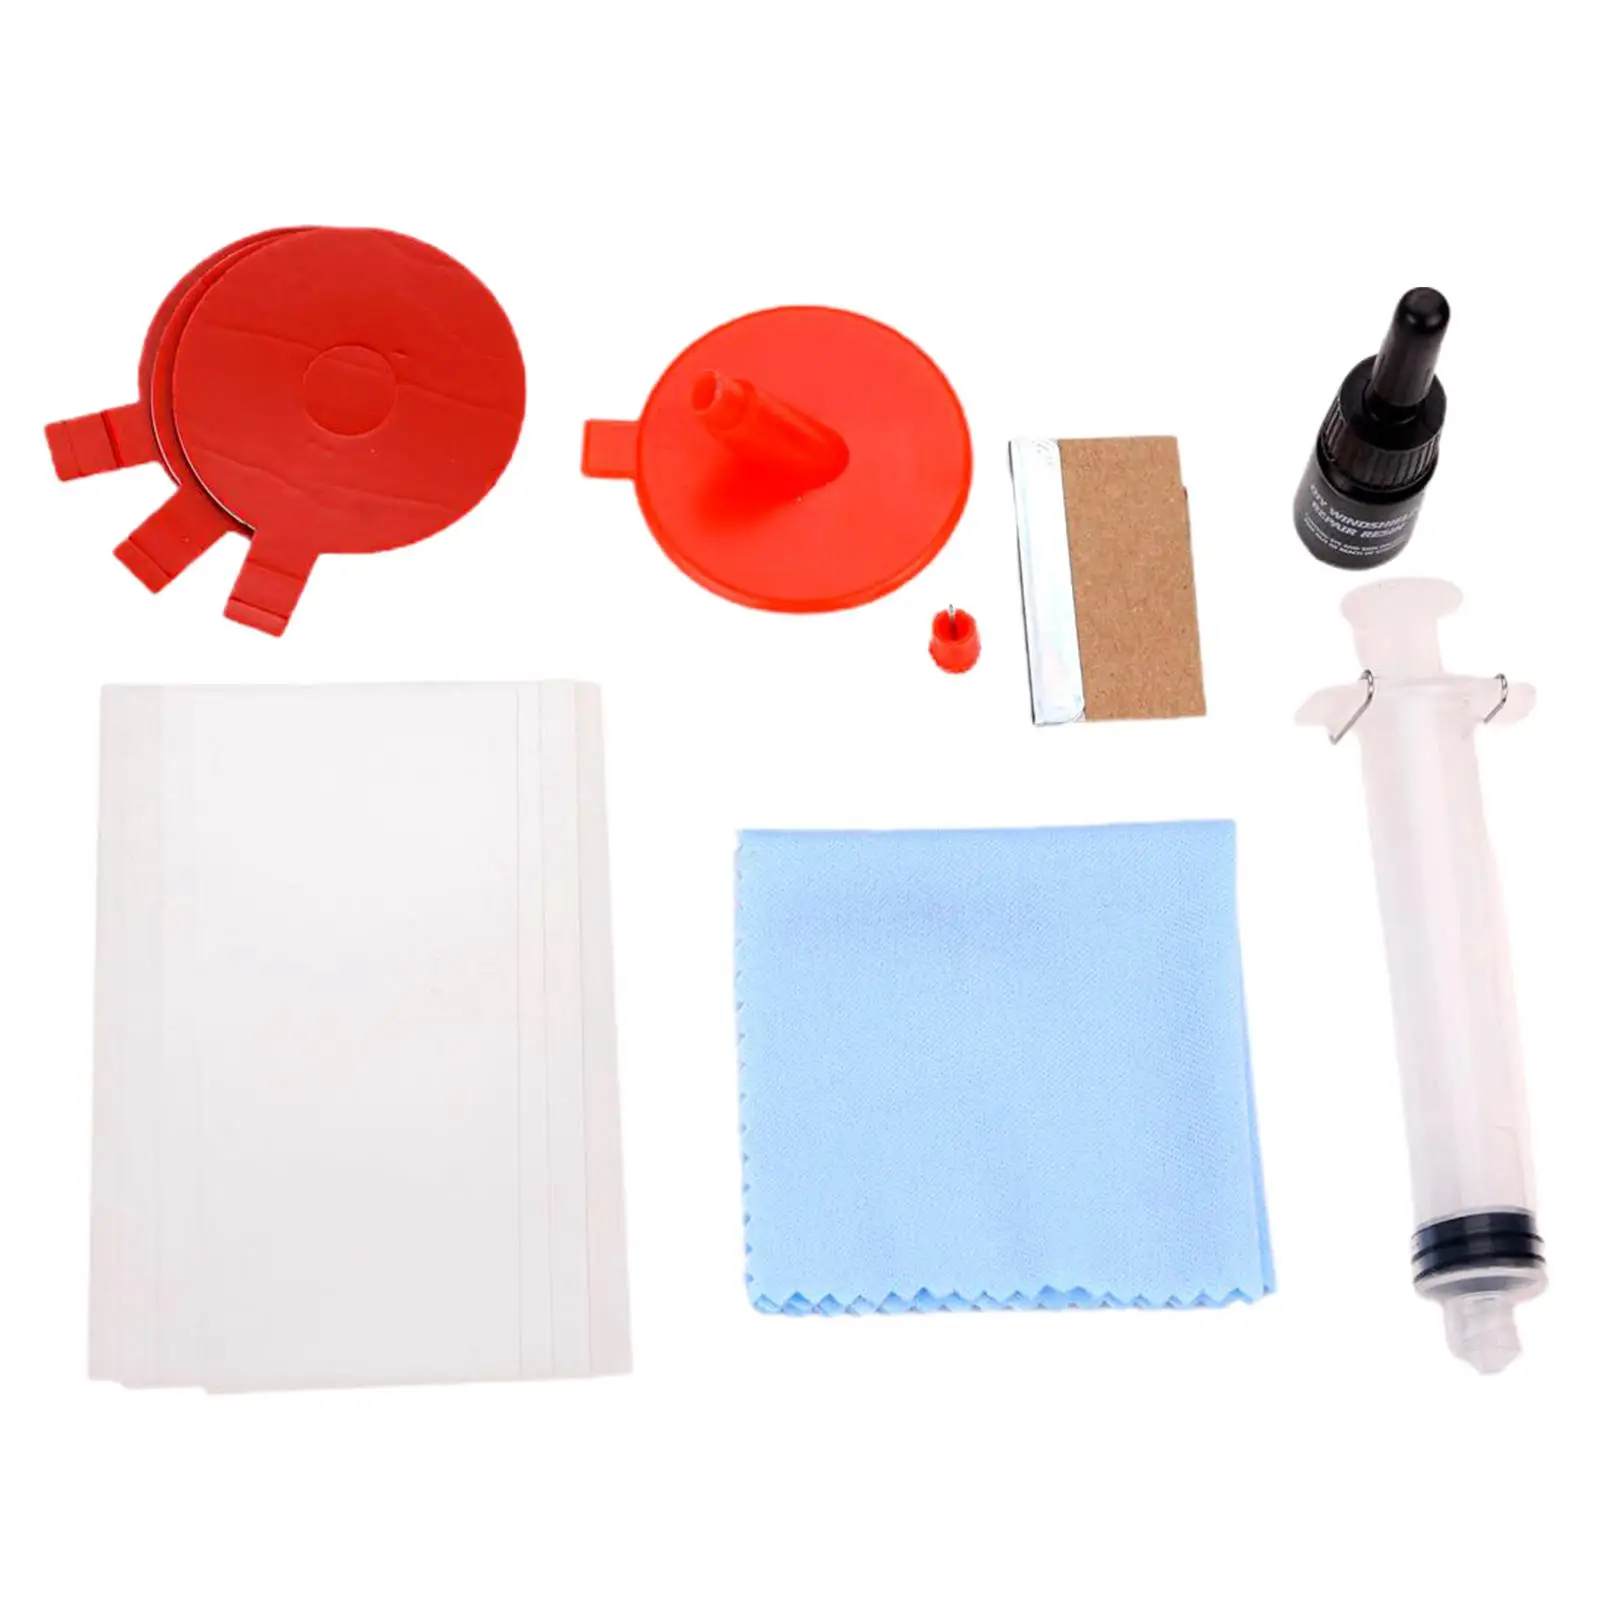 Car Windshield Repair Kit Auto Glass Windshield Repair Set Tools for Star Shaped Damage moon Cracks Fixing Chips